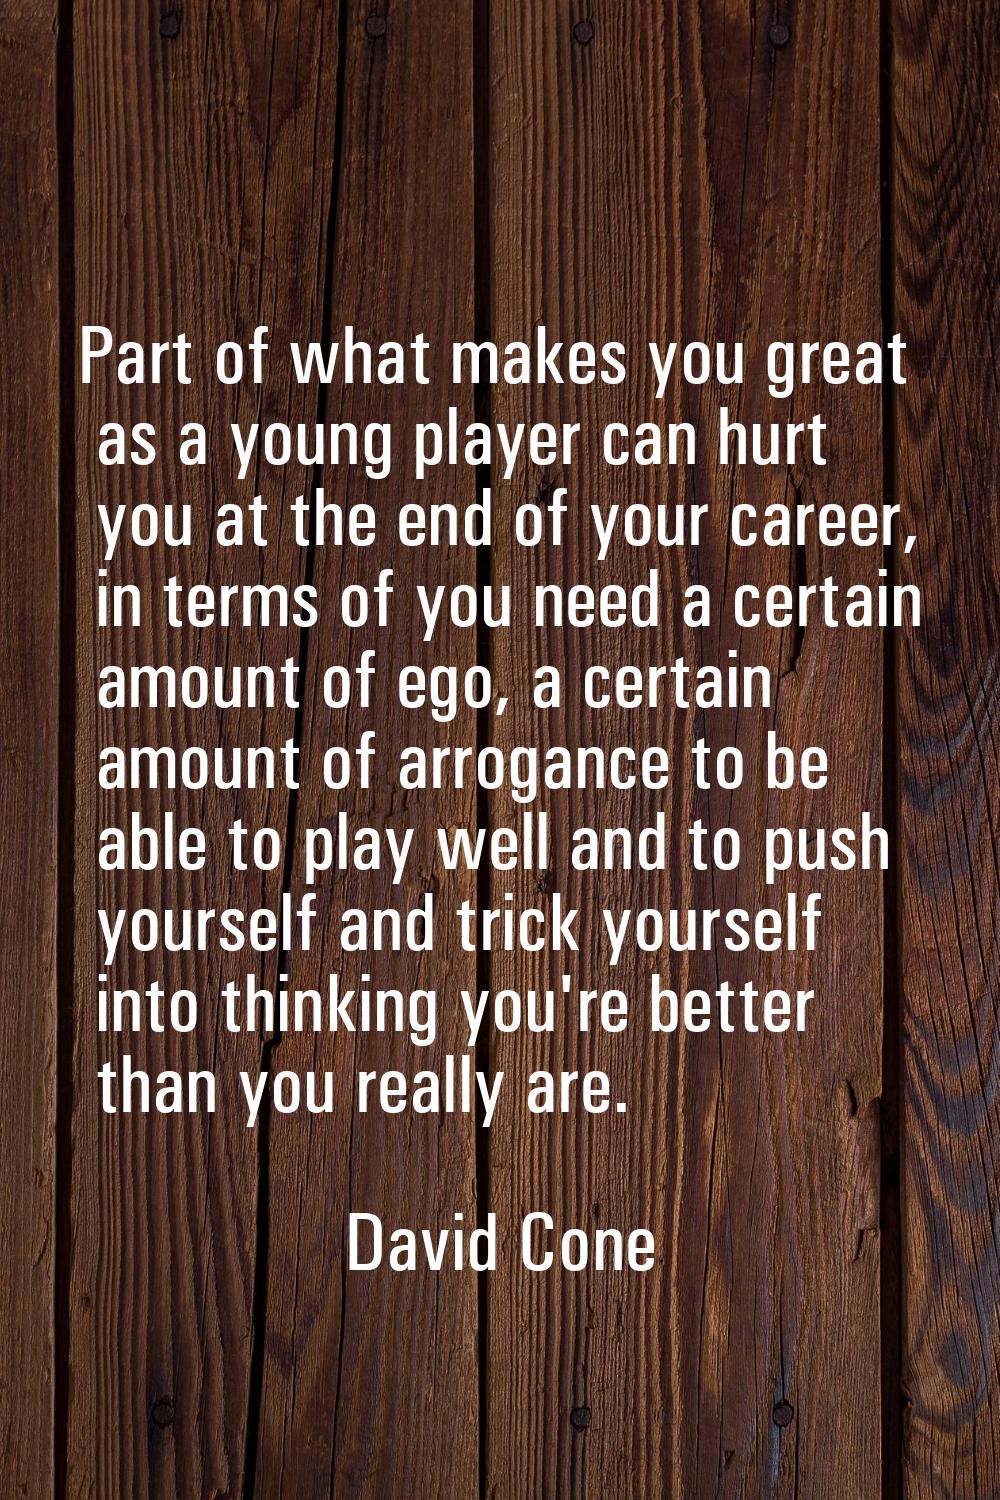 Part of what makes you great as a young player can hurt you at the end of your career, in terms of 